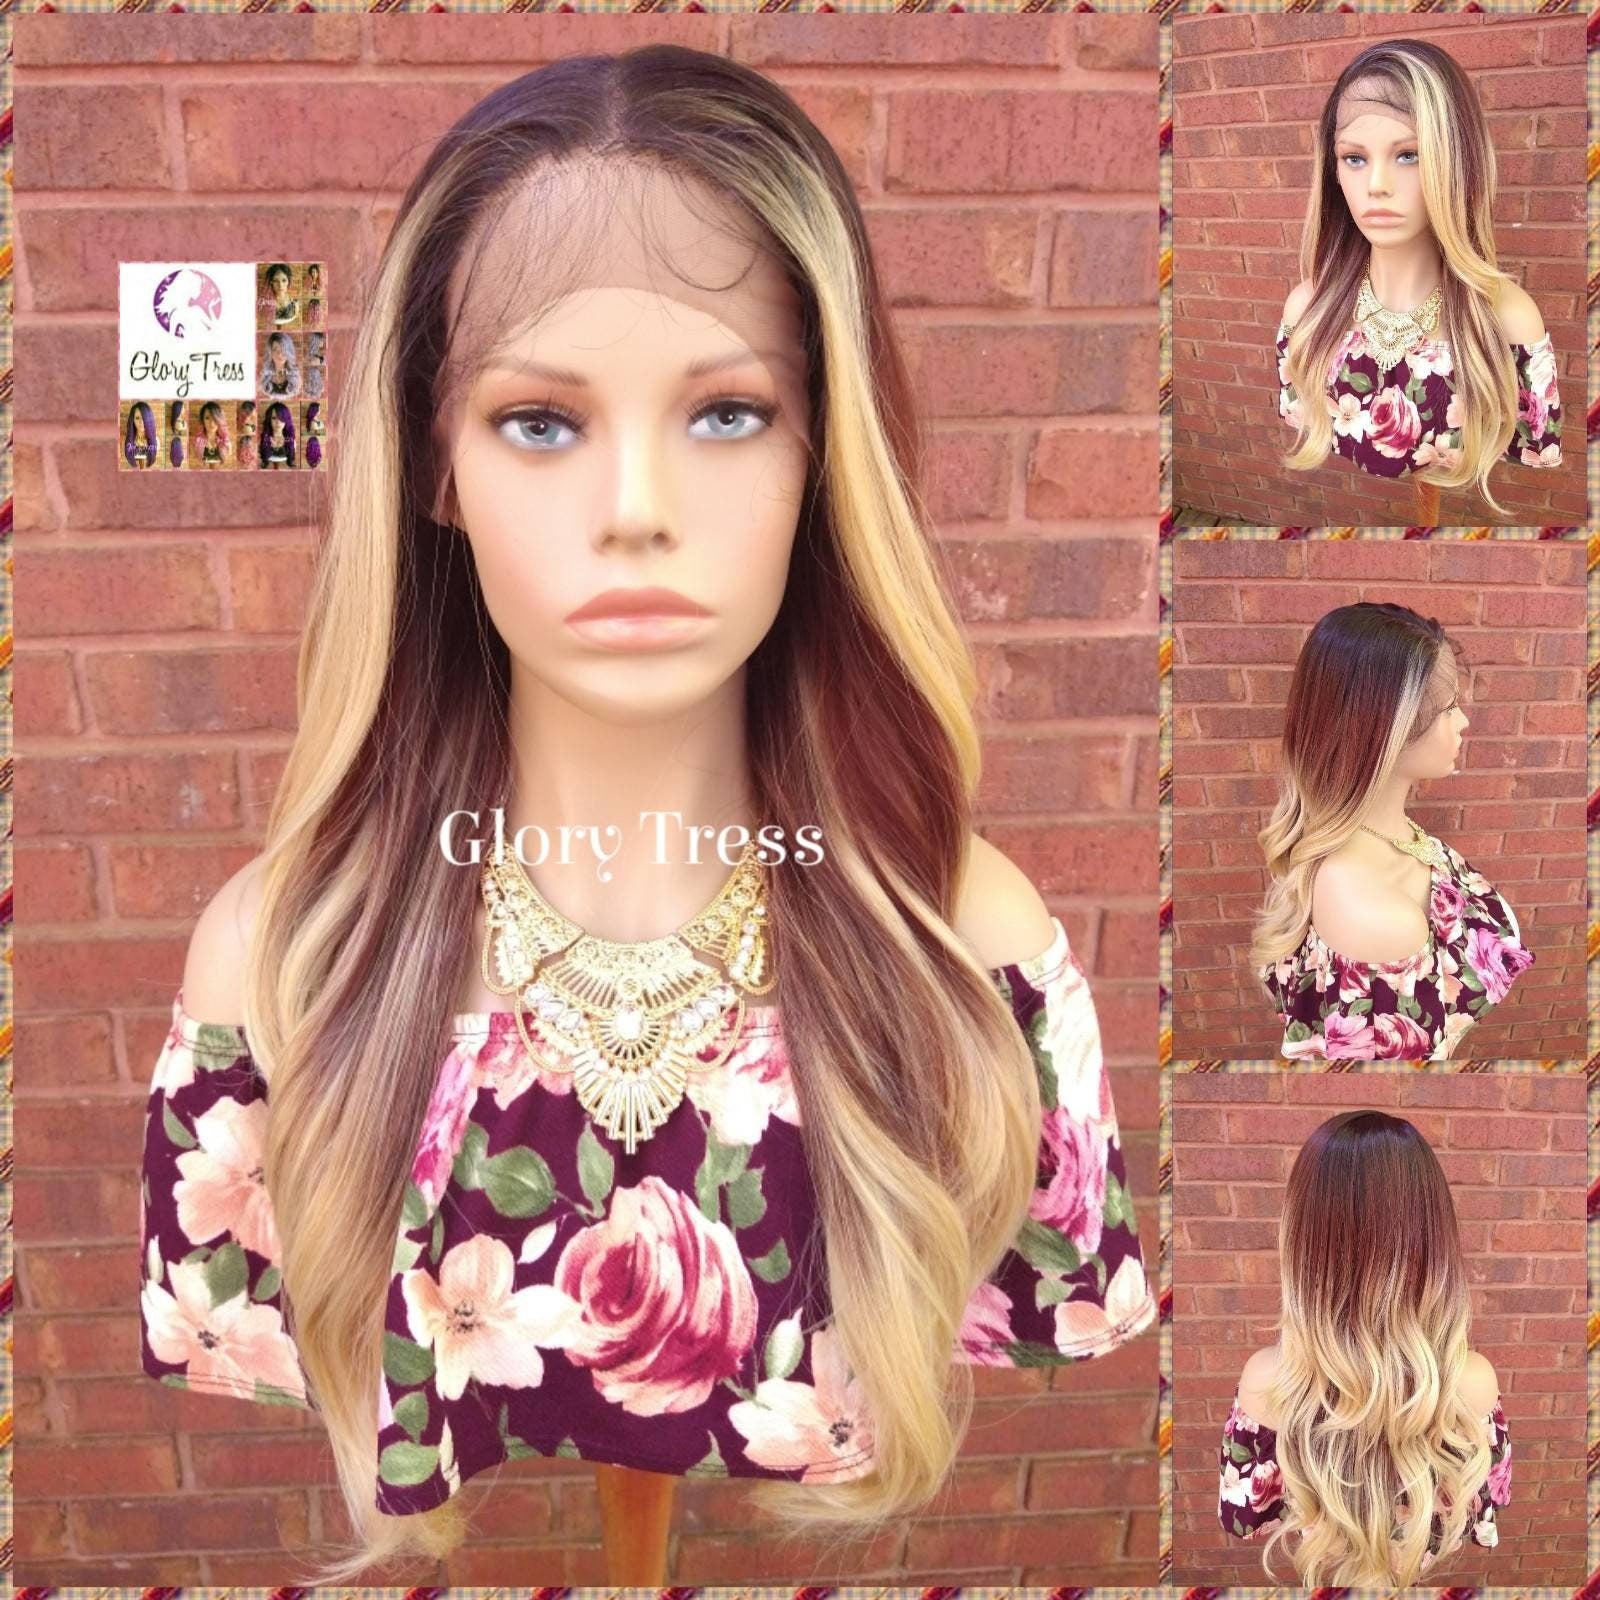 Wavy Lace Front Wig, Money Piece Highlights, Blonde Wig, Blonde Wig, Glory Tress, Wigs, Wig, 13 x 7 Free Parting, ON SALE  // GLOW